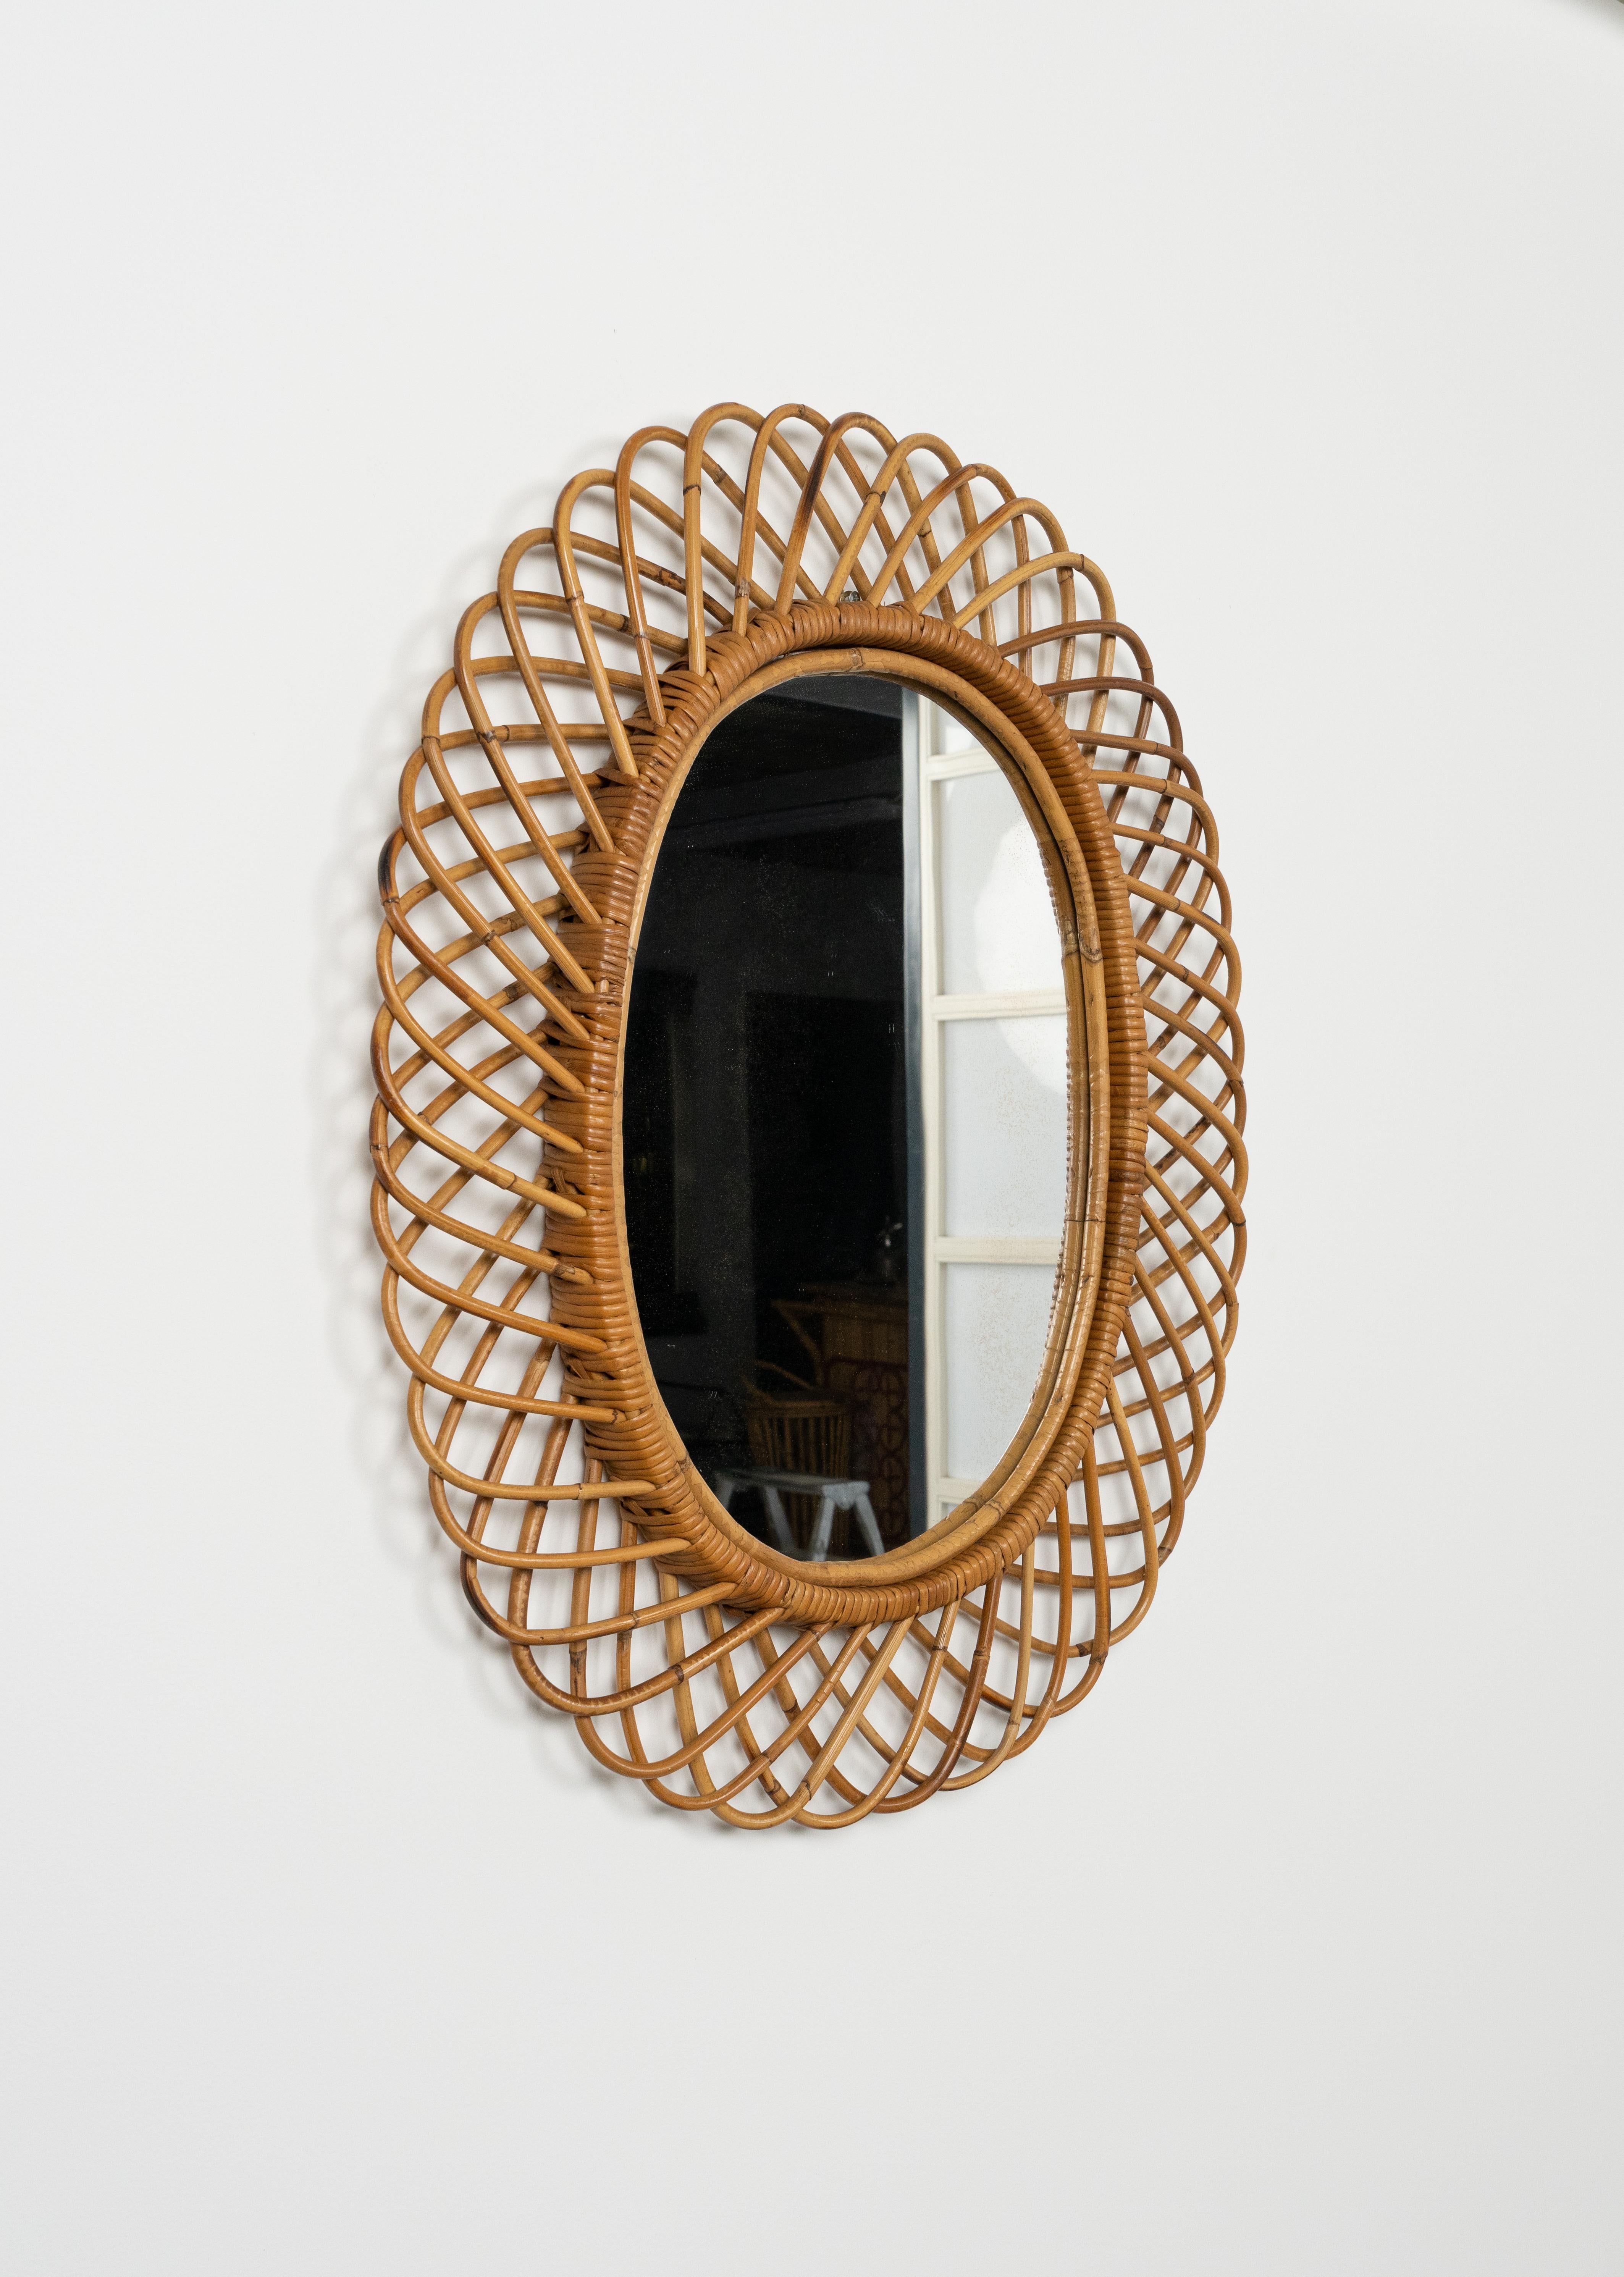 Mid-Century Modern Midcentury Rattan and Bamboo Oval Wall Mirror by Franco Albini, Italy 1960s For Sale